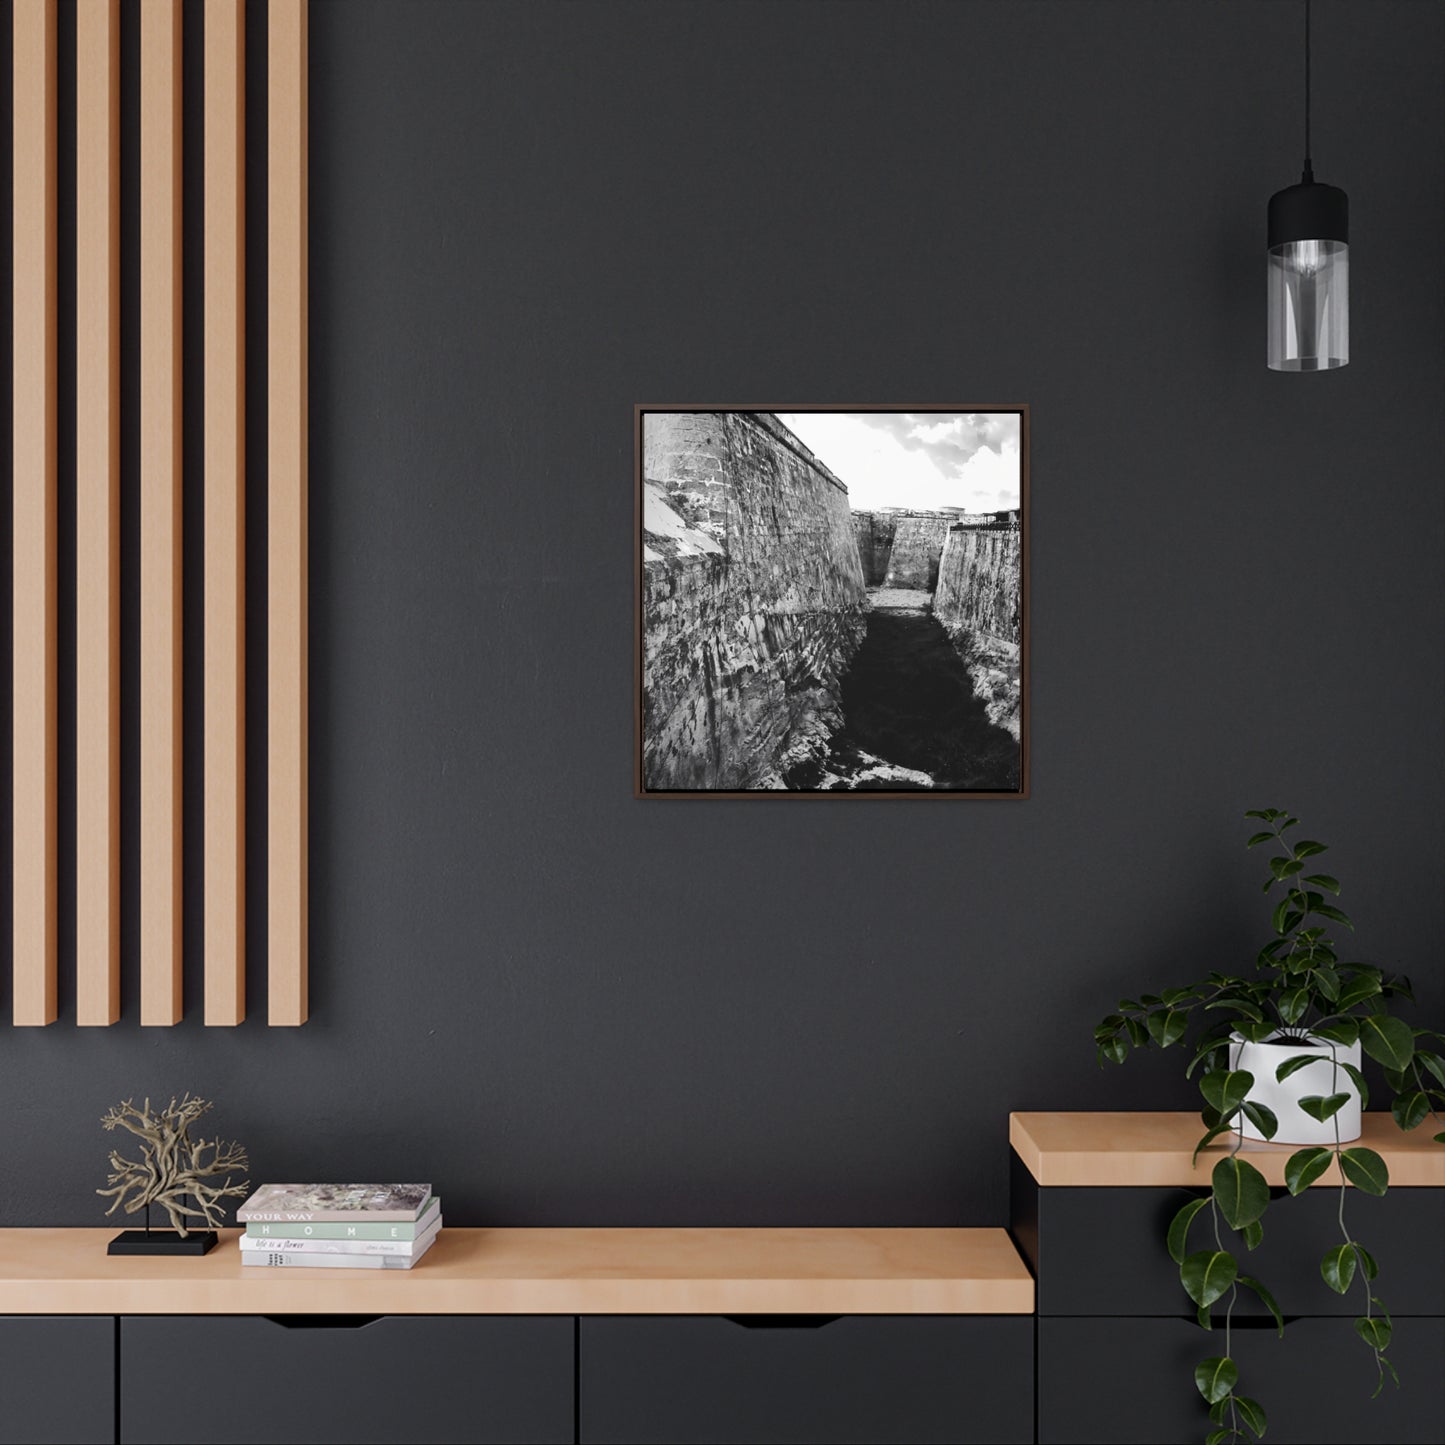 The Wall - Framed Gallery Canvas